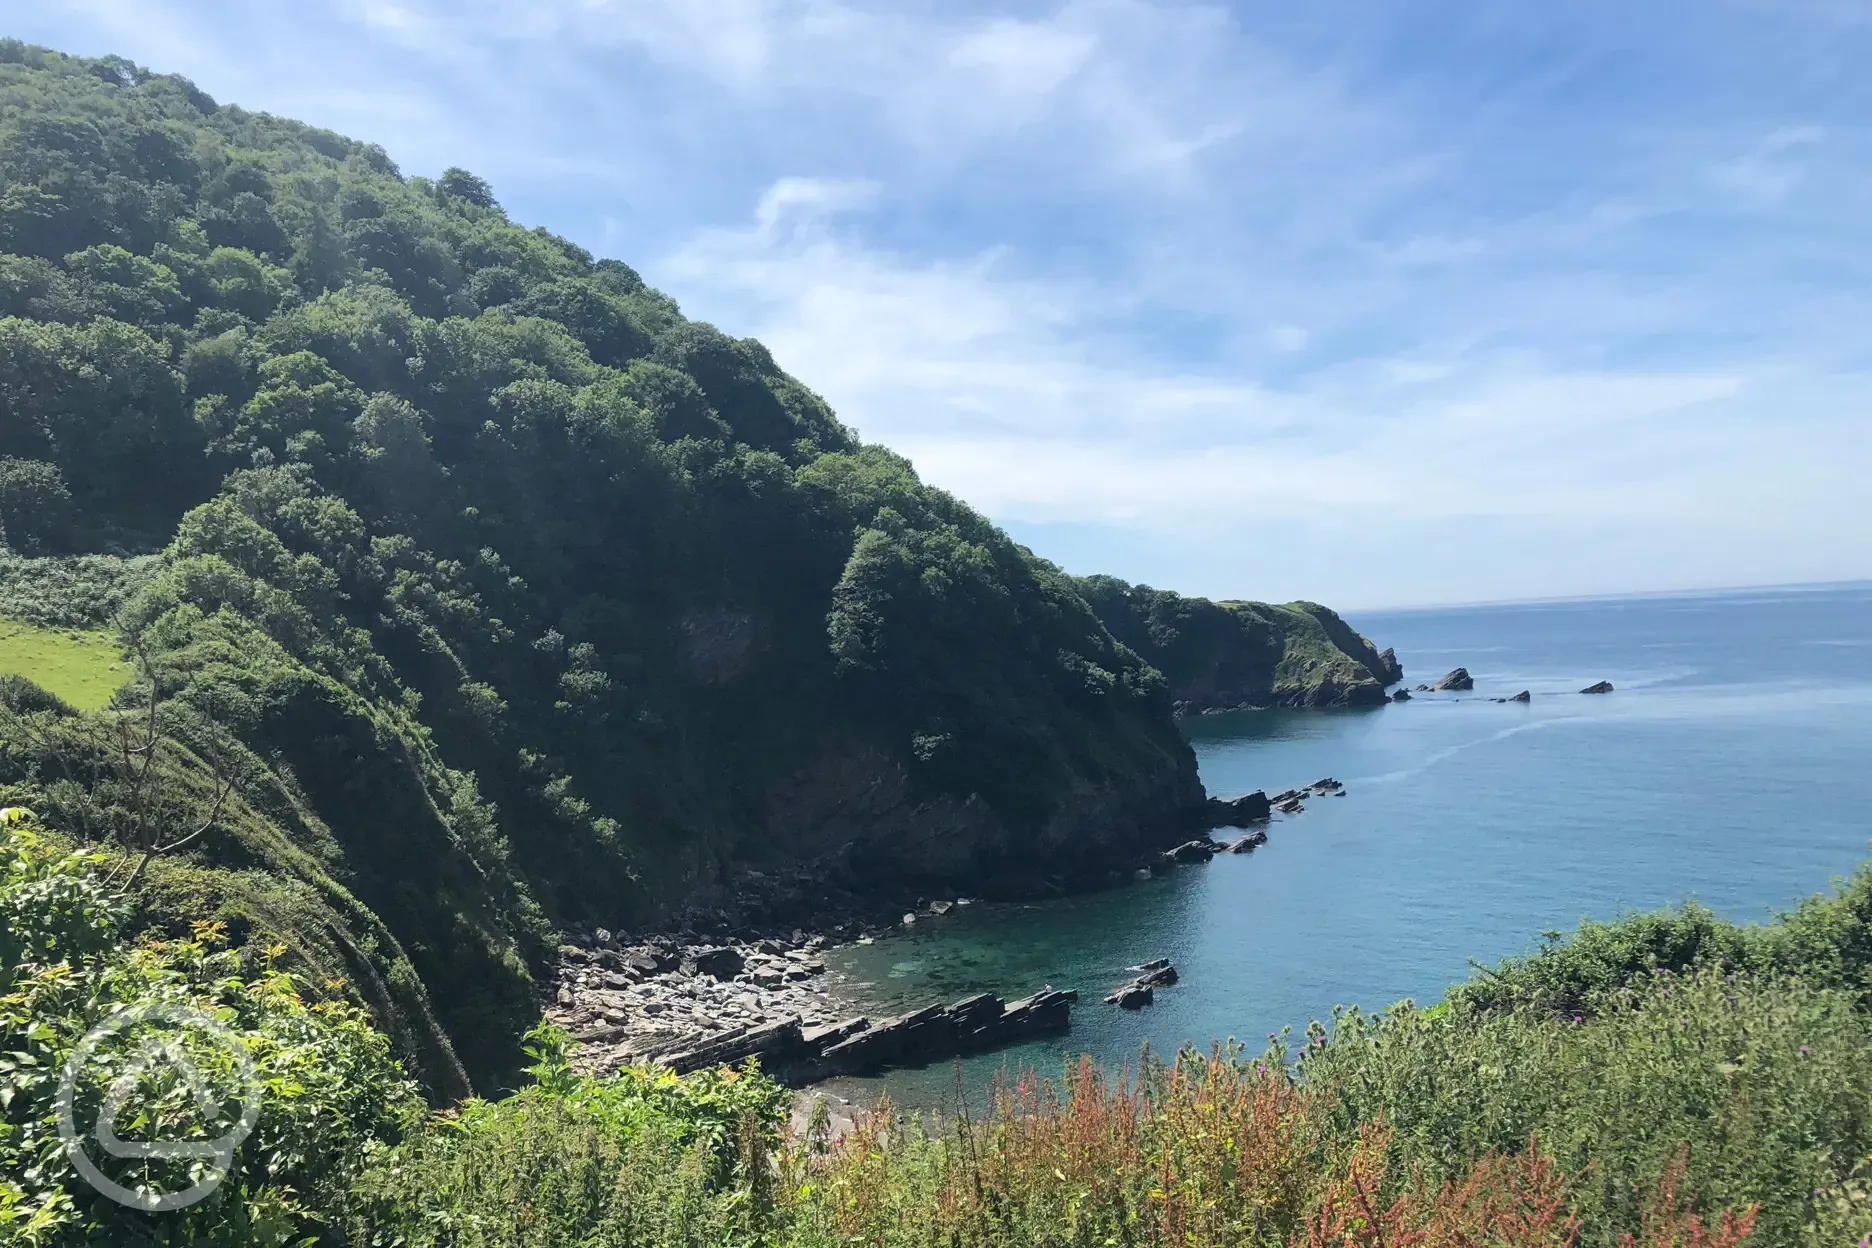 Secluded coves are dotting along the coastline